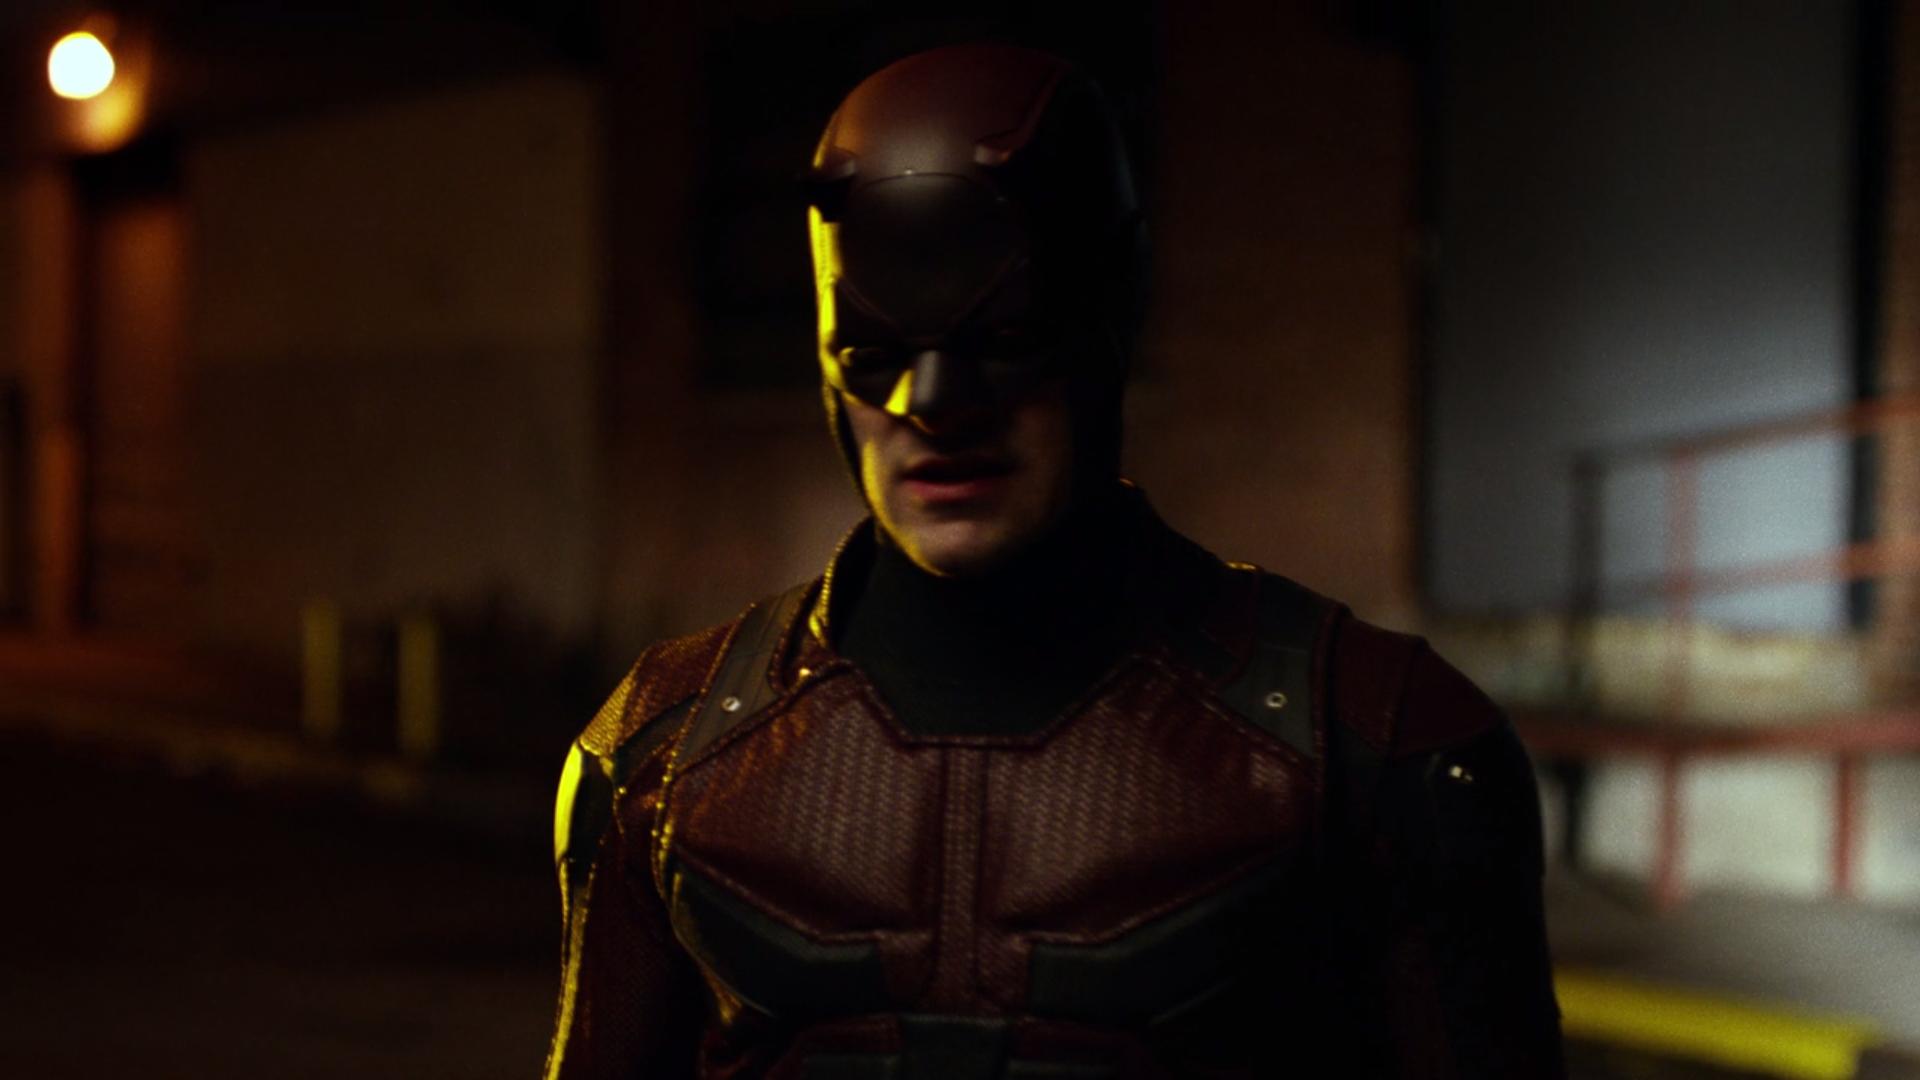 SPOILERS: Check Out 15 HD Screengrabs Of DAREDEVIL's Red Suit And That Big Reveal